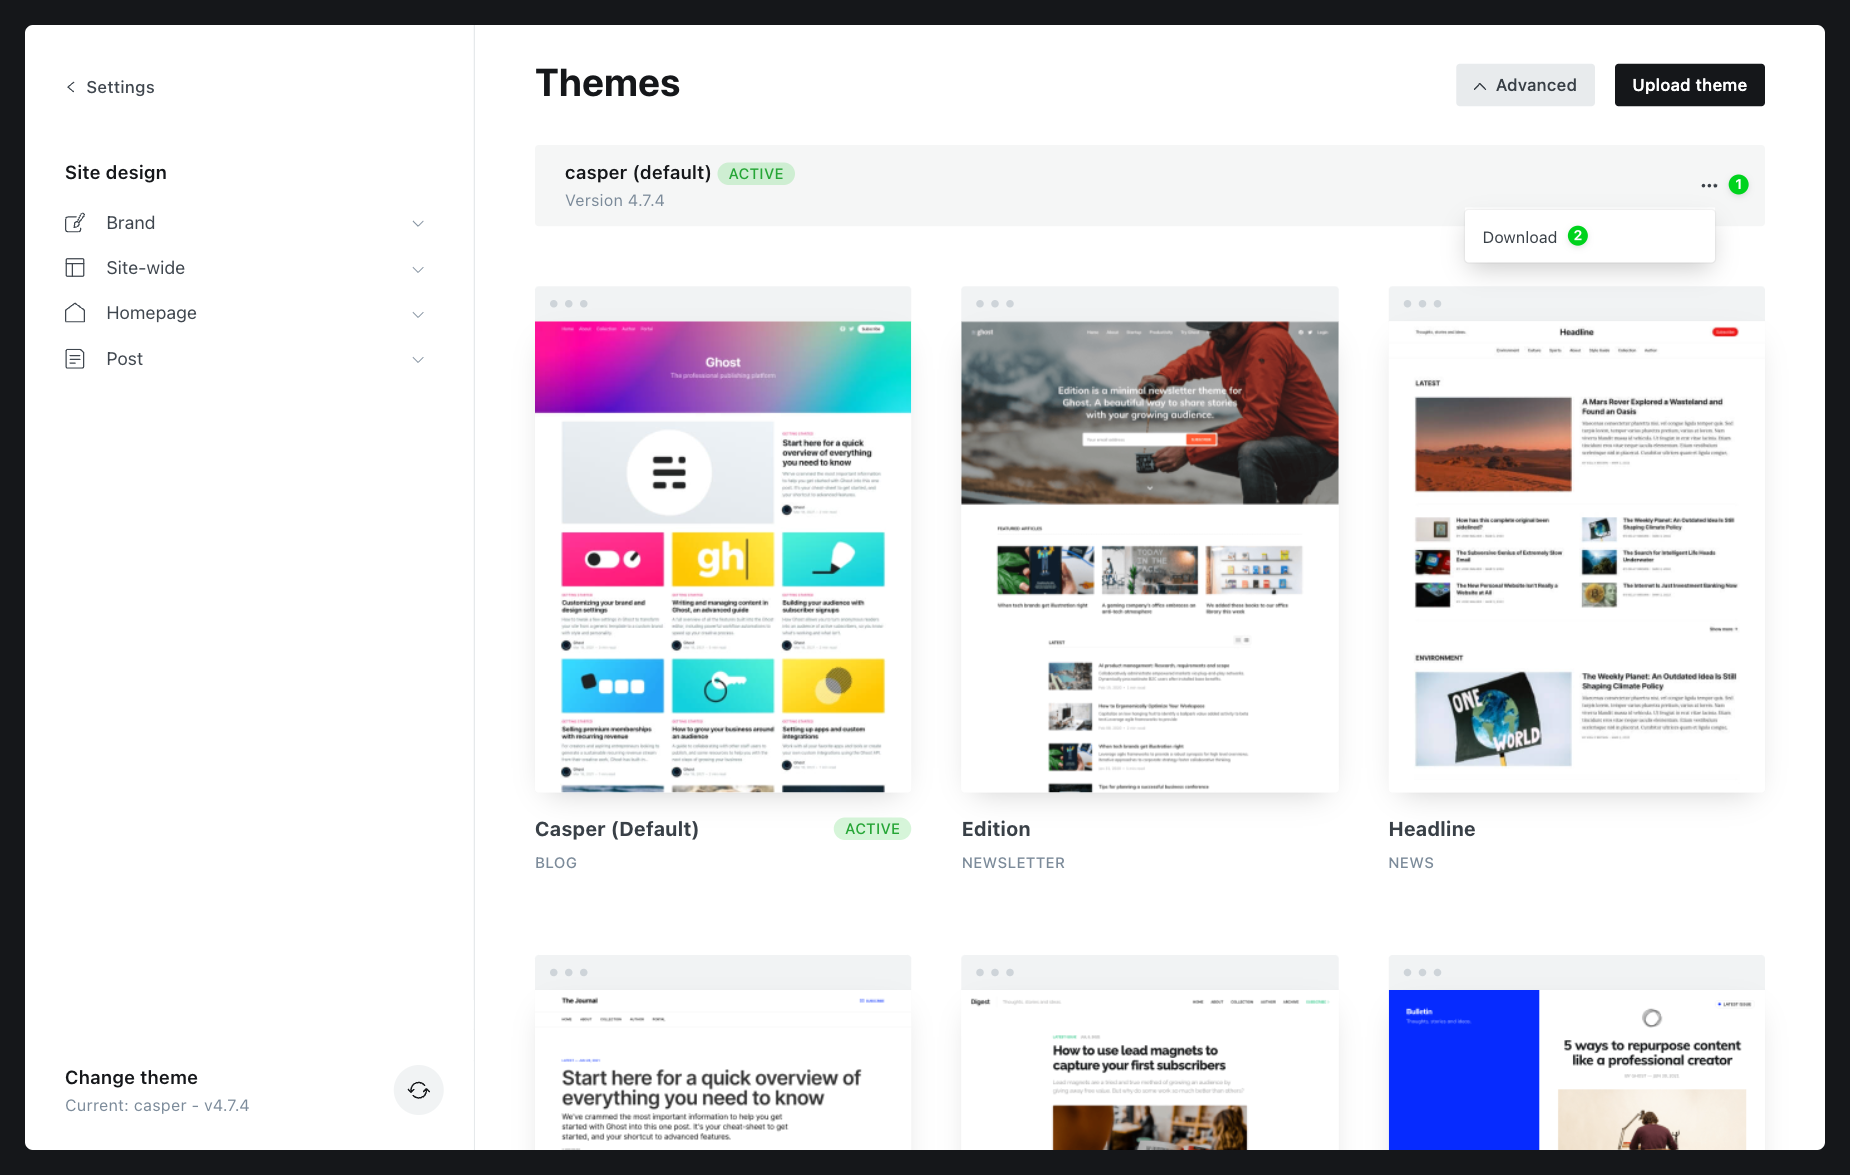 Themes page with Download option highlighted